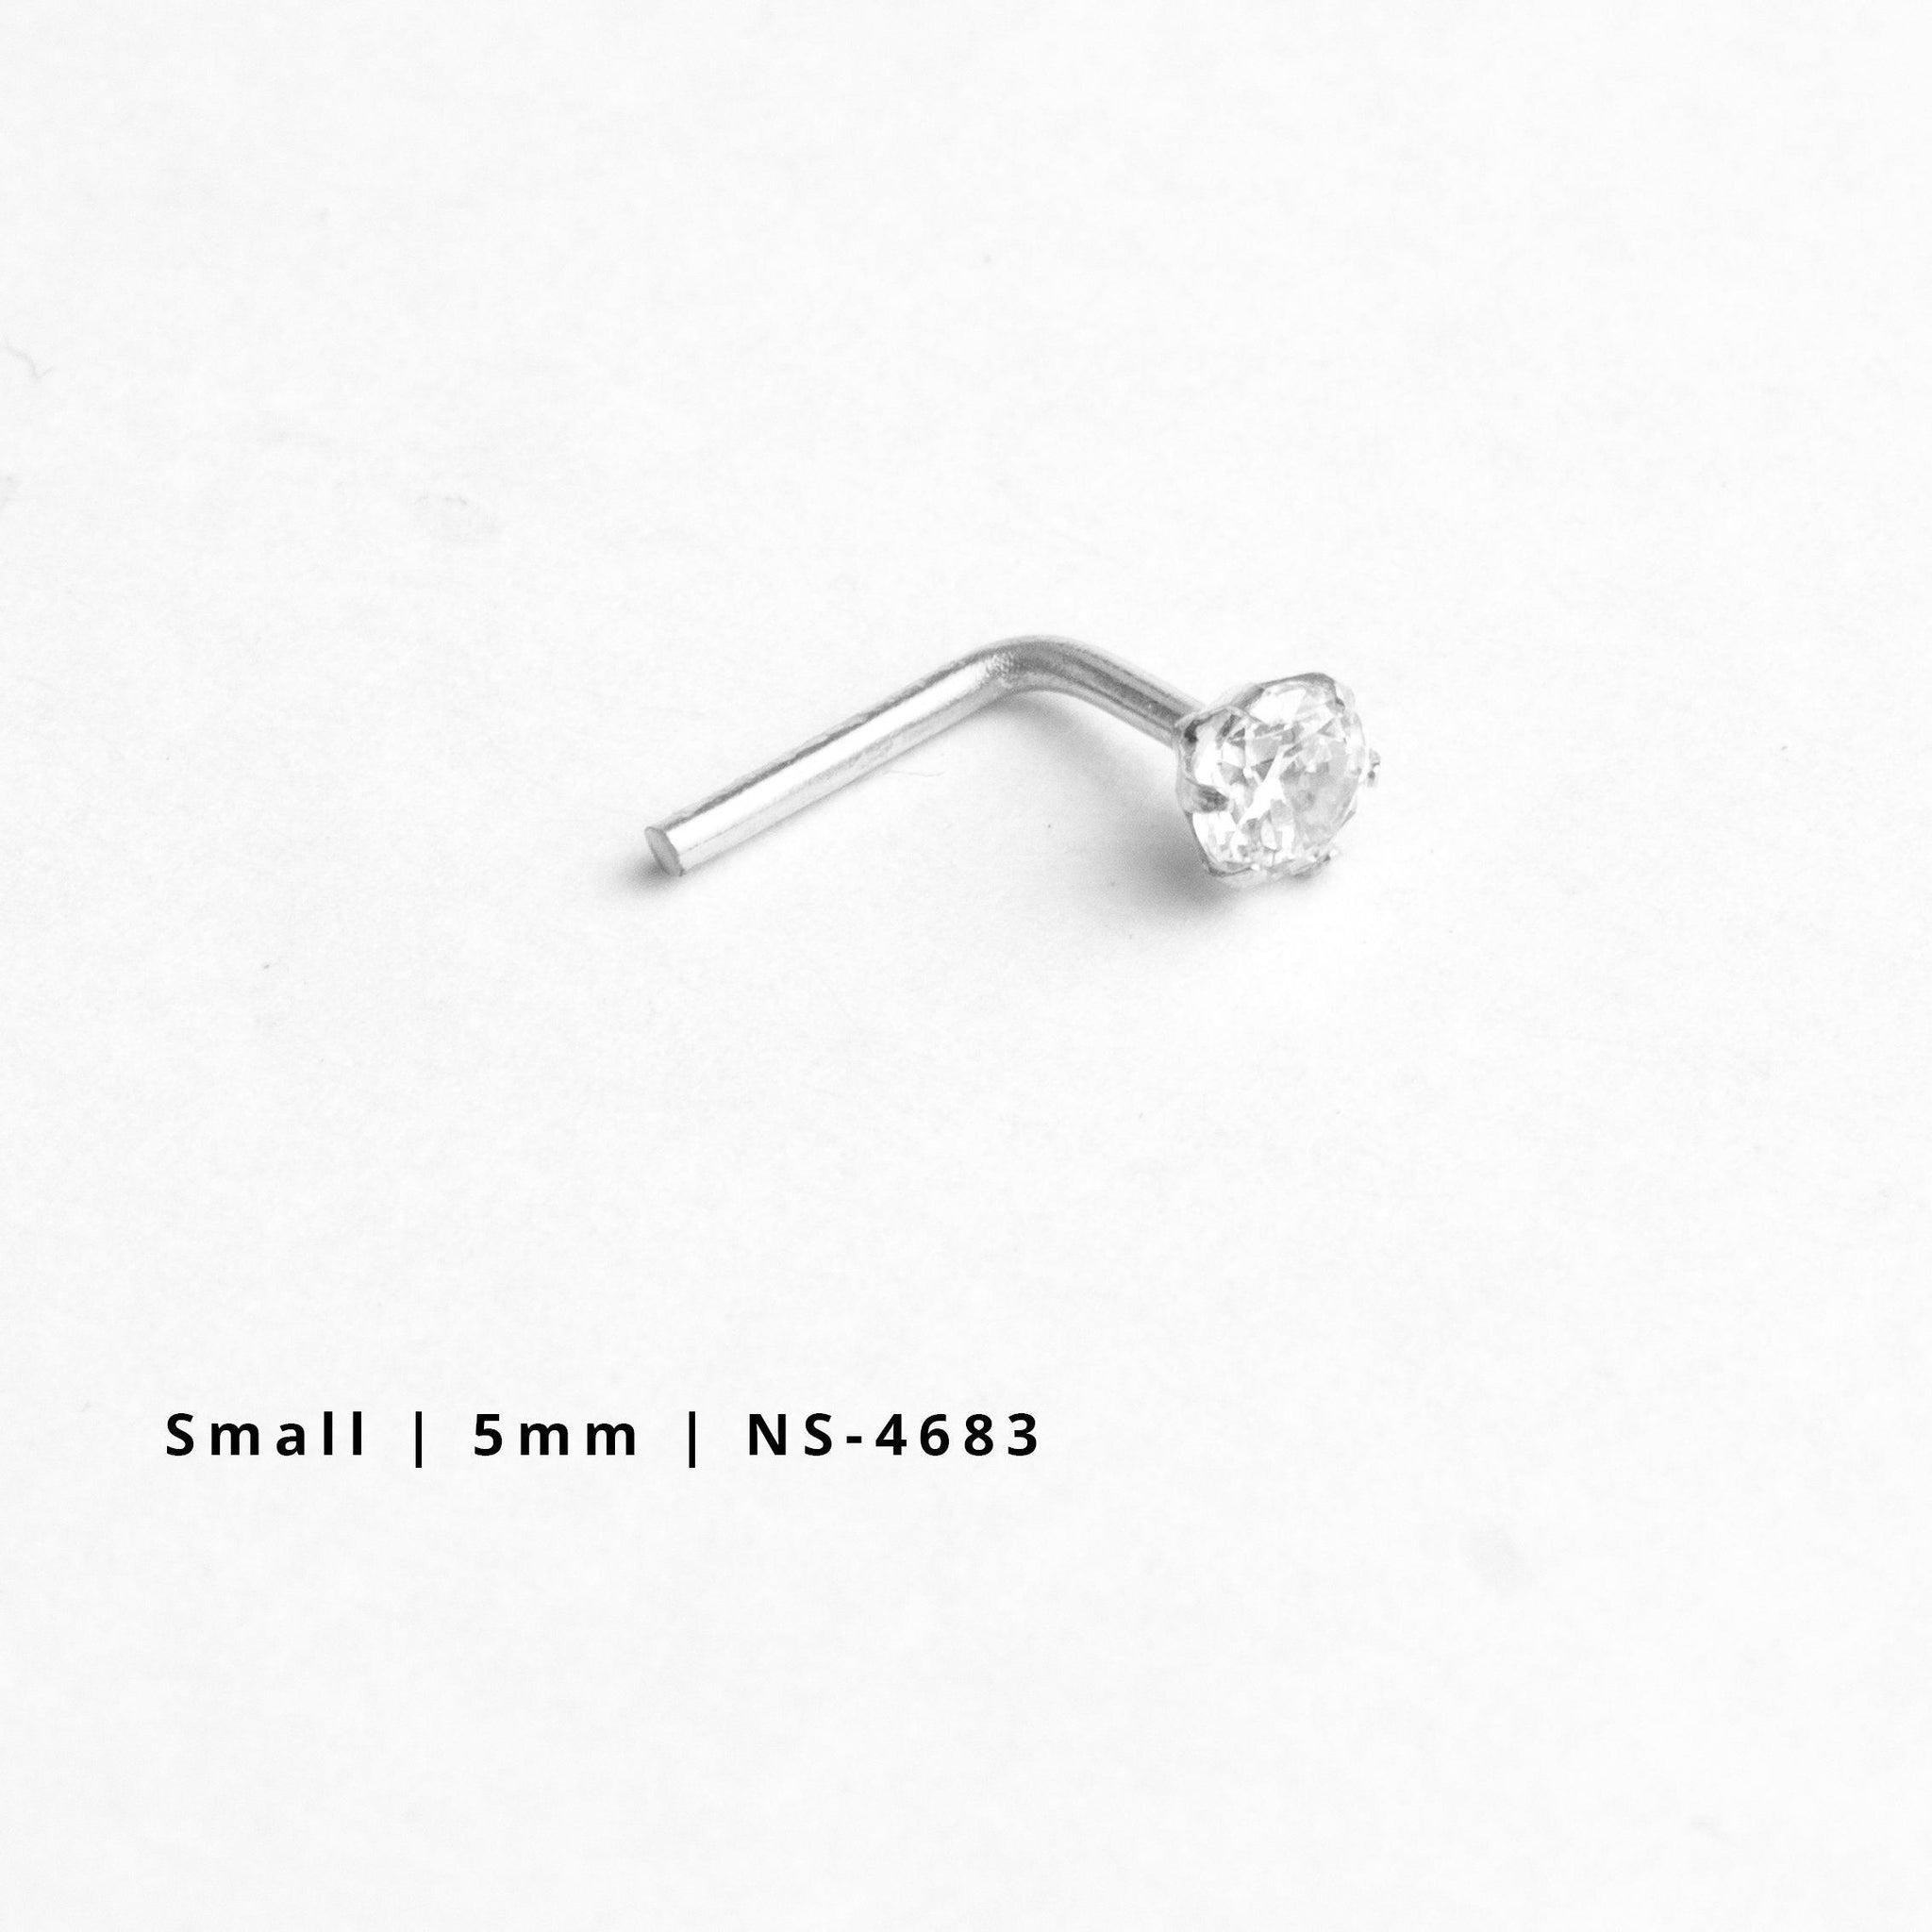 18ct Gold Nose Stud L-Shaped back with a Cubic Zirconia Stone (2mm - 4.5mm)